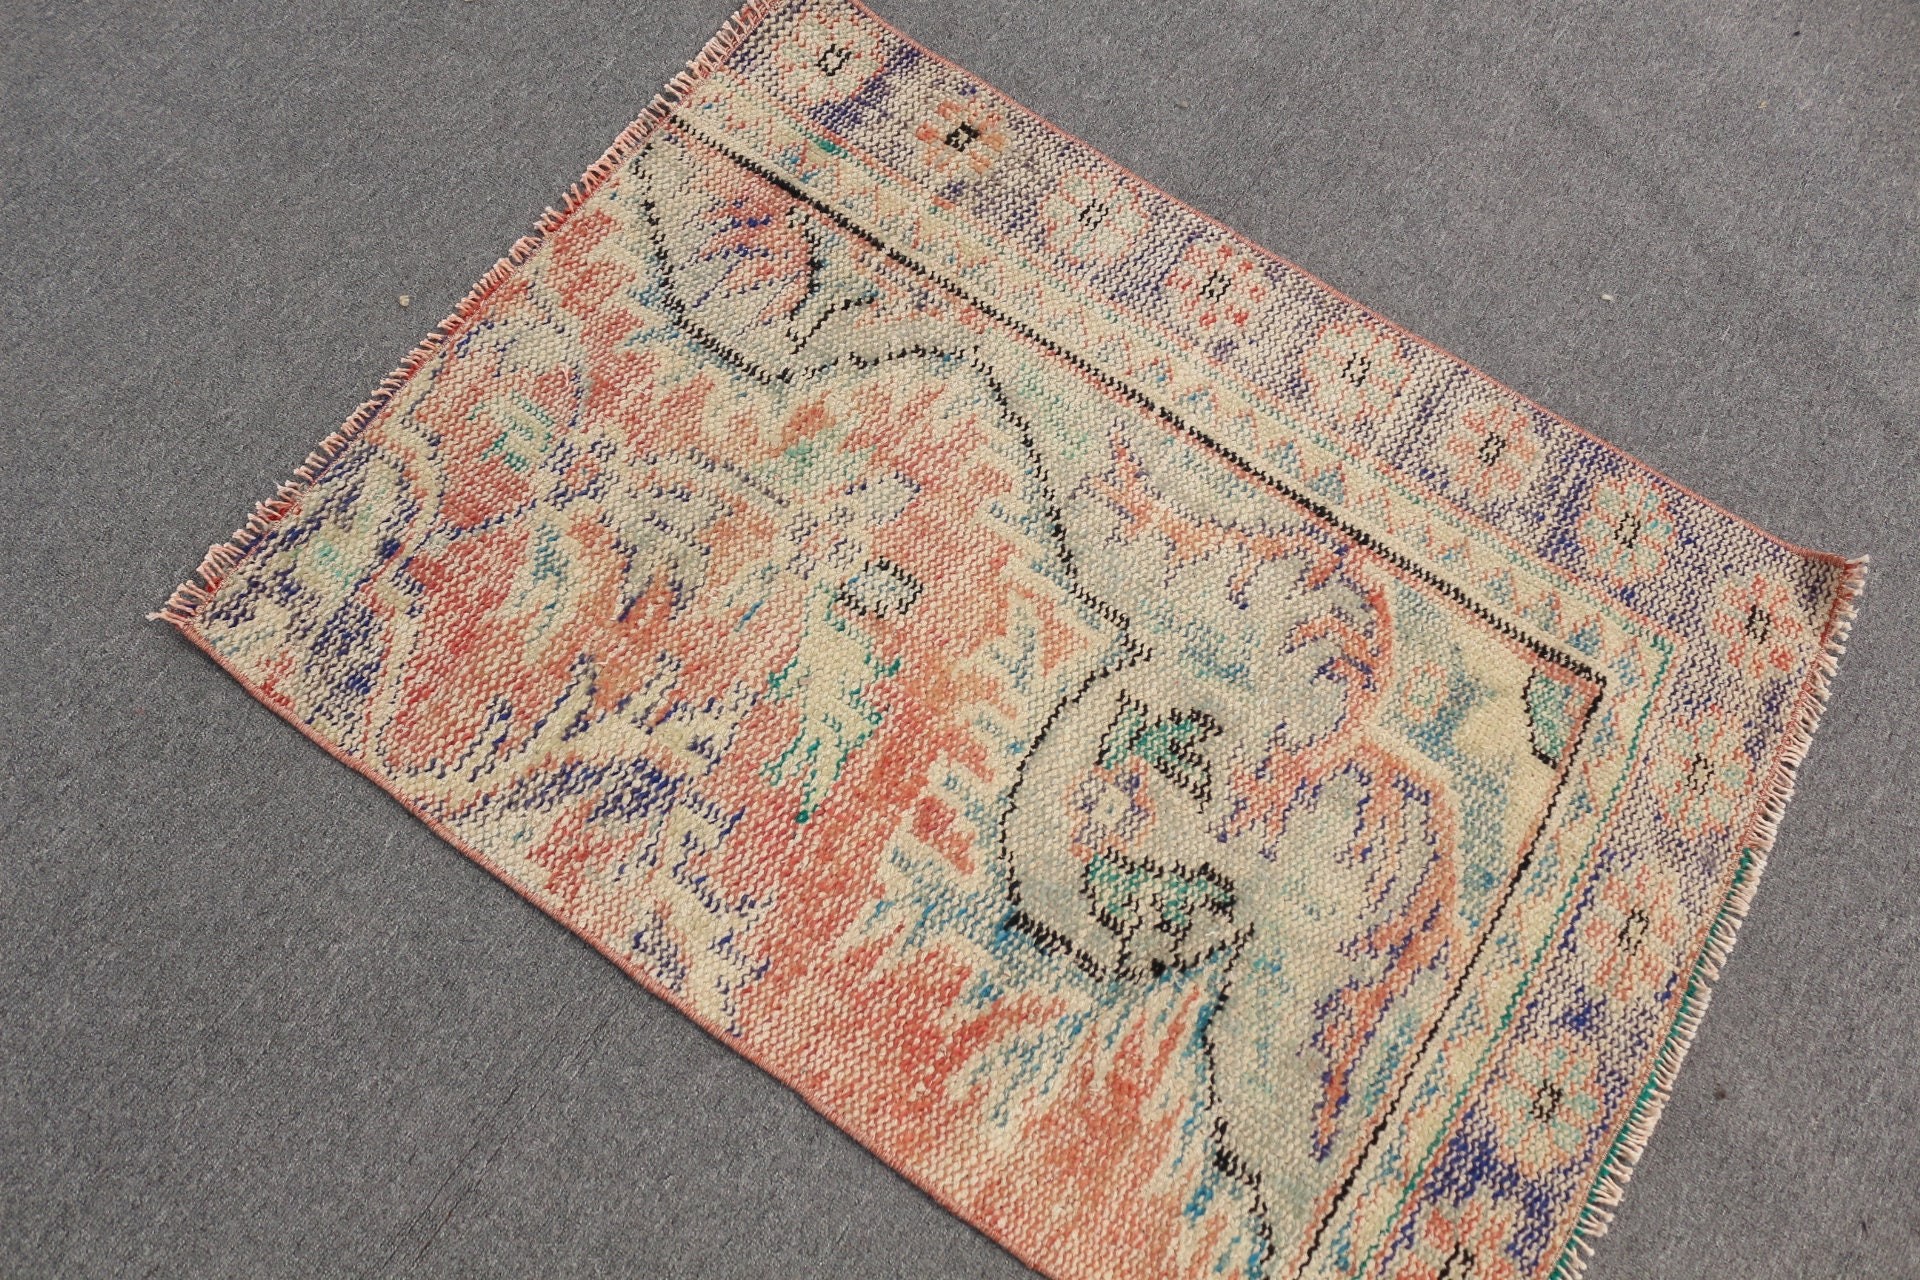 Bathroom Rug, Car Mat Rug, Vintage Rug, Turkish Rugs, Red Antique Rug, Kitchen Rugs, Cool Rug, Rugs for Car Mat, 2.7x3.5 ft Small Rugs